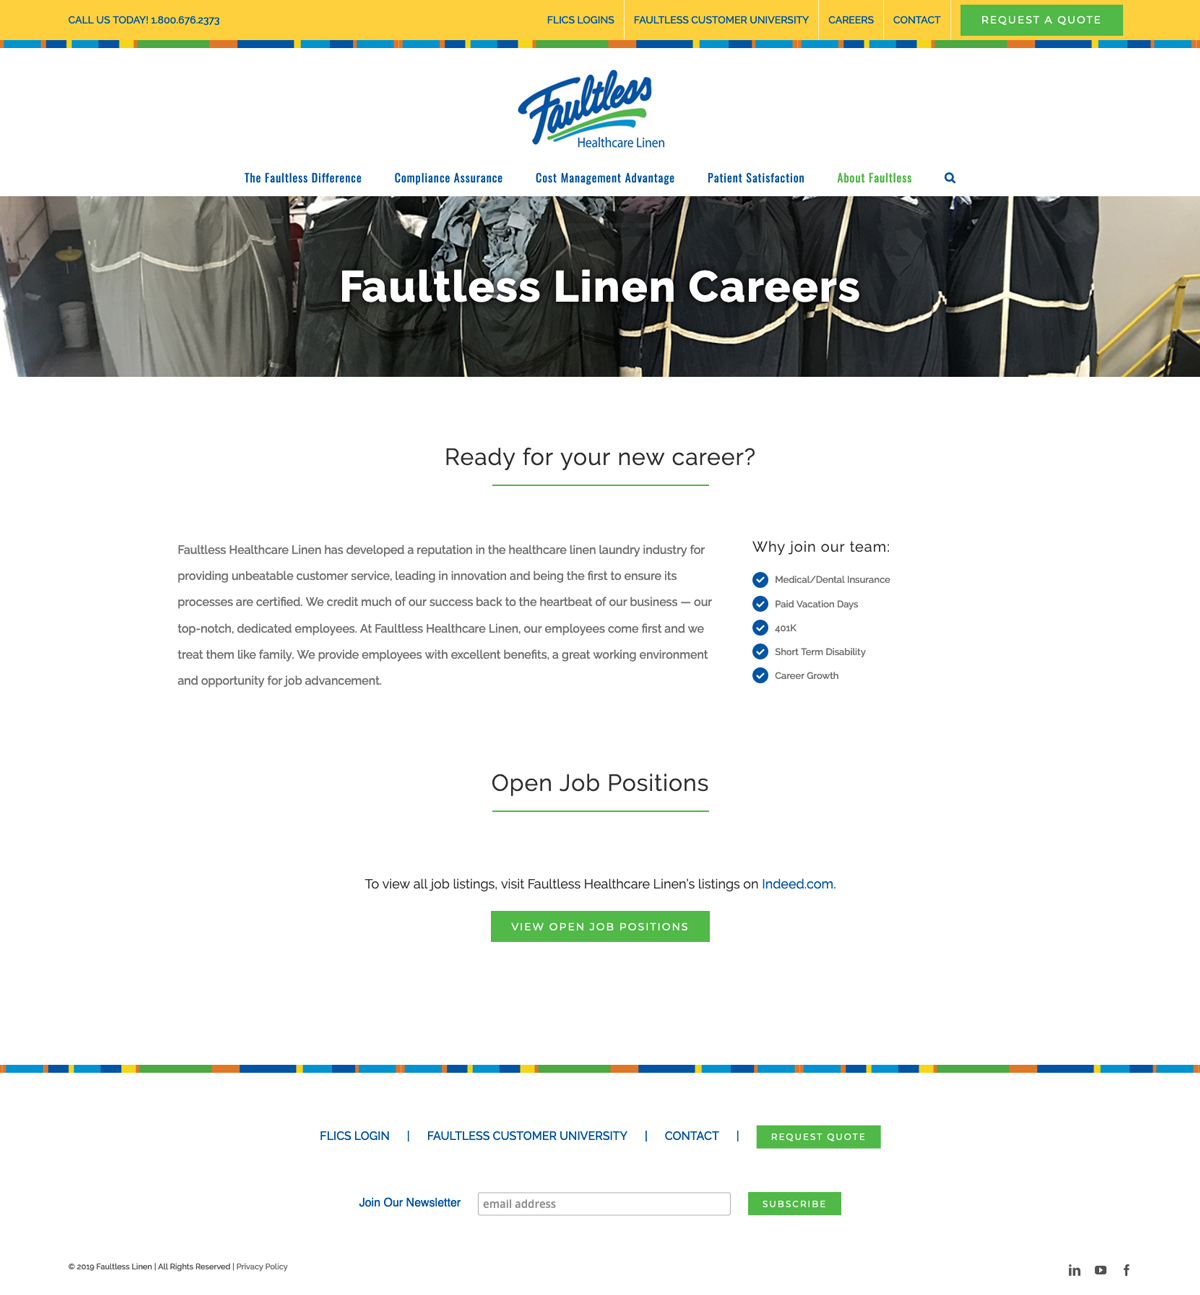 Company Website Design for Faultless Healthcare Linen - Careers Page